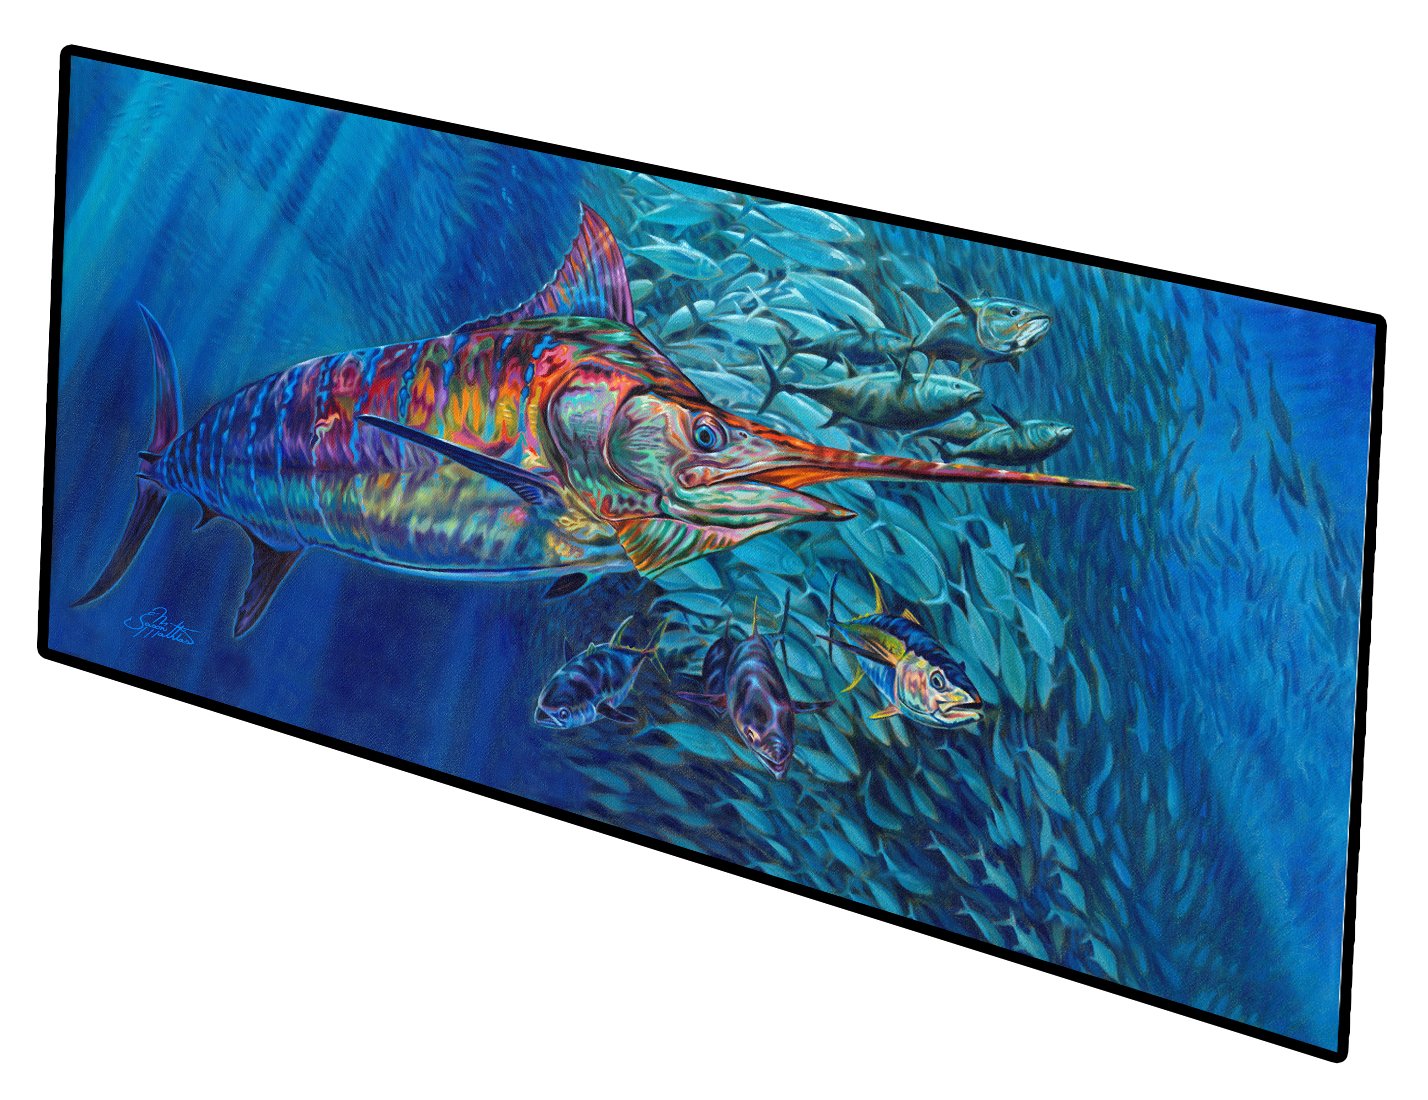 Blue Mirage Blue Marlin and Sharks Indoor or Outdoor Runner Mat 28x58 JMA2001HRM2858 by Caroline's Treasures